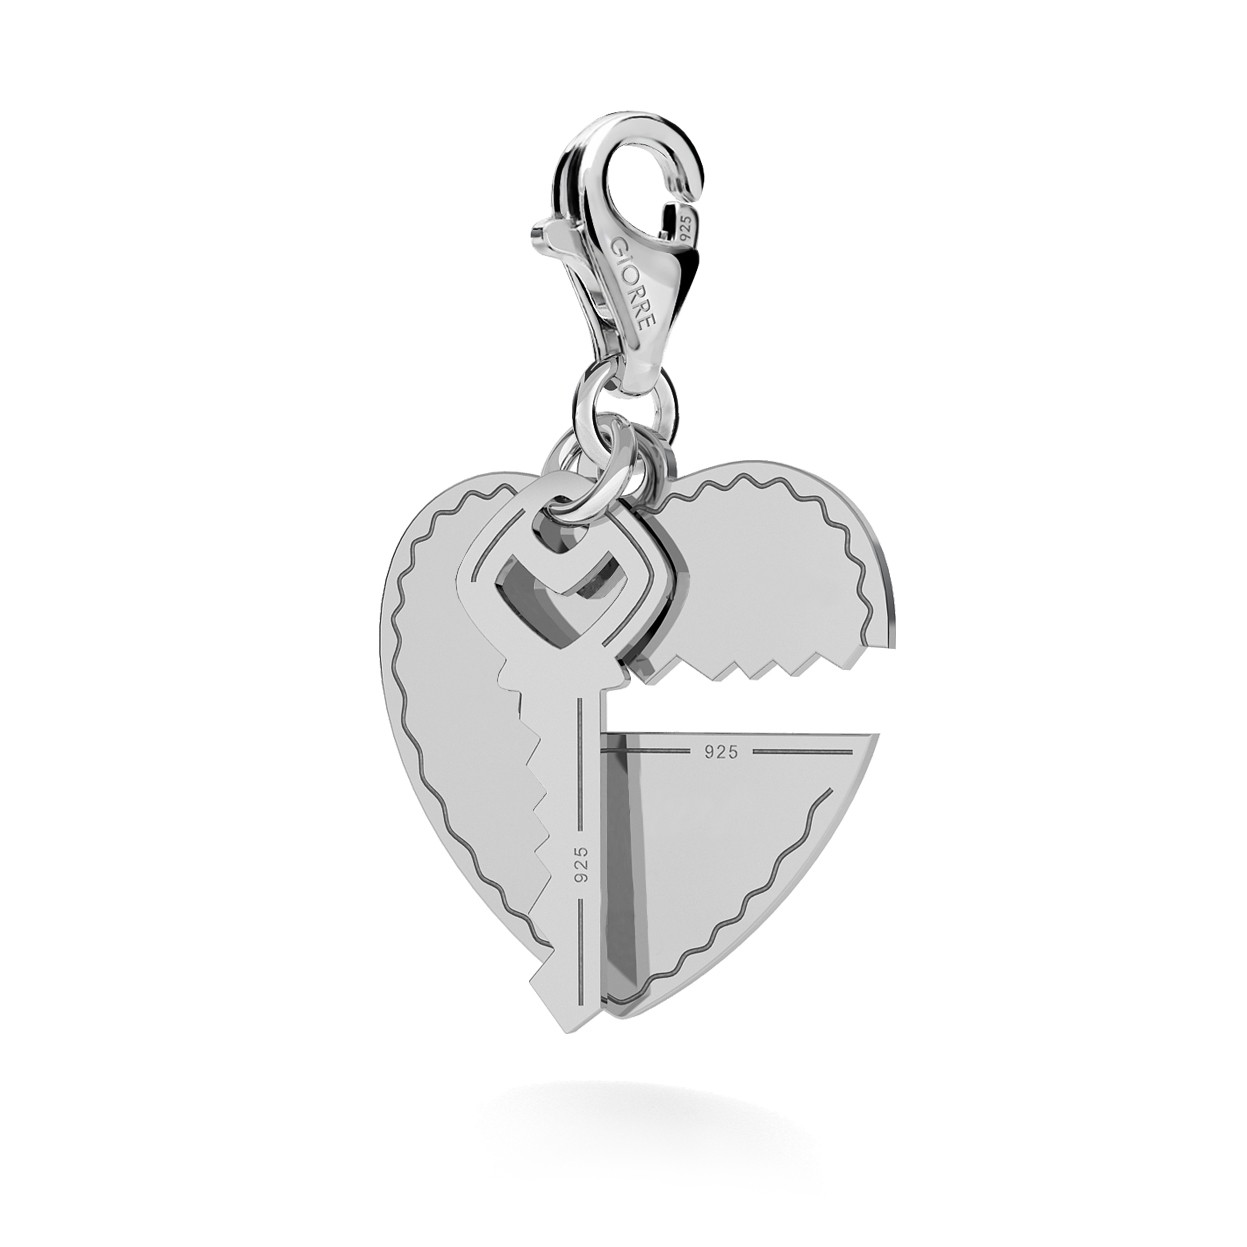 CHARM 108, LOVE HEART WITH KEY, STERLING SILVER (925) RHODIUM OR GOLD PLATED